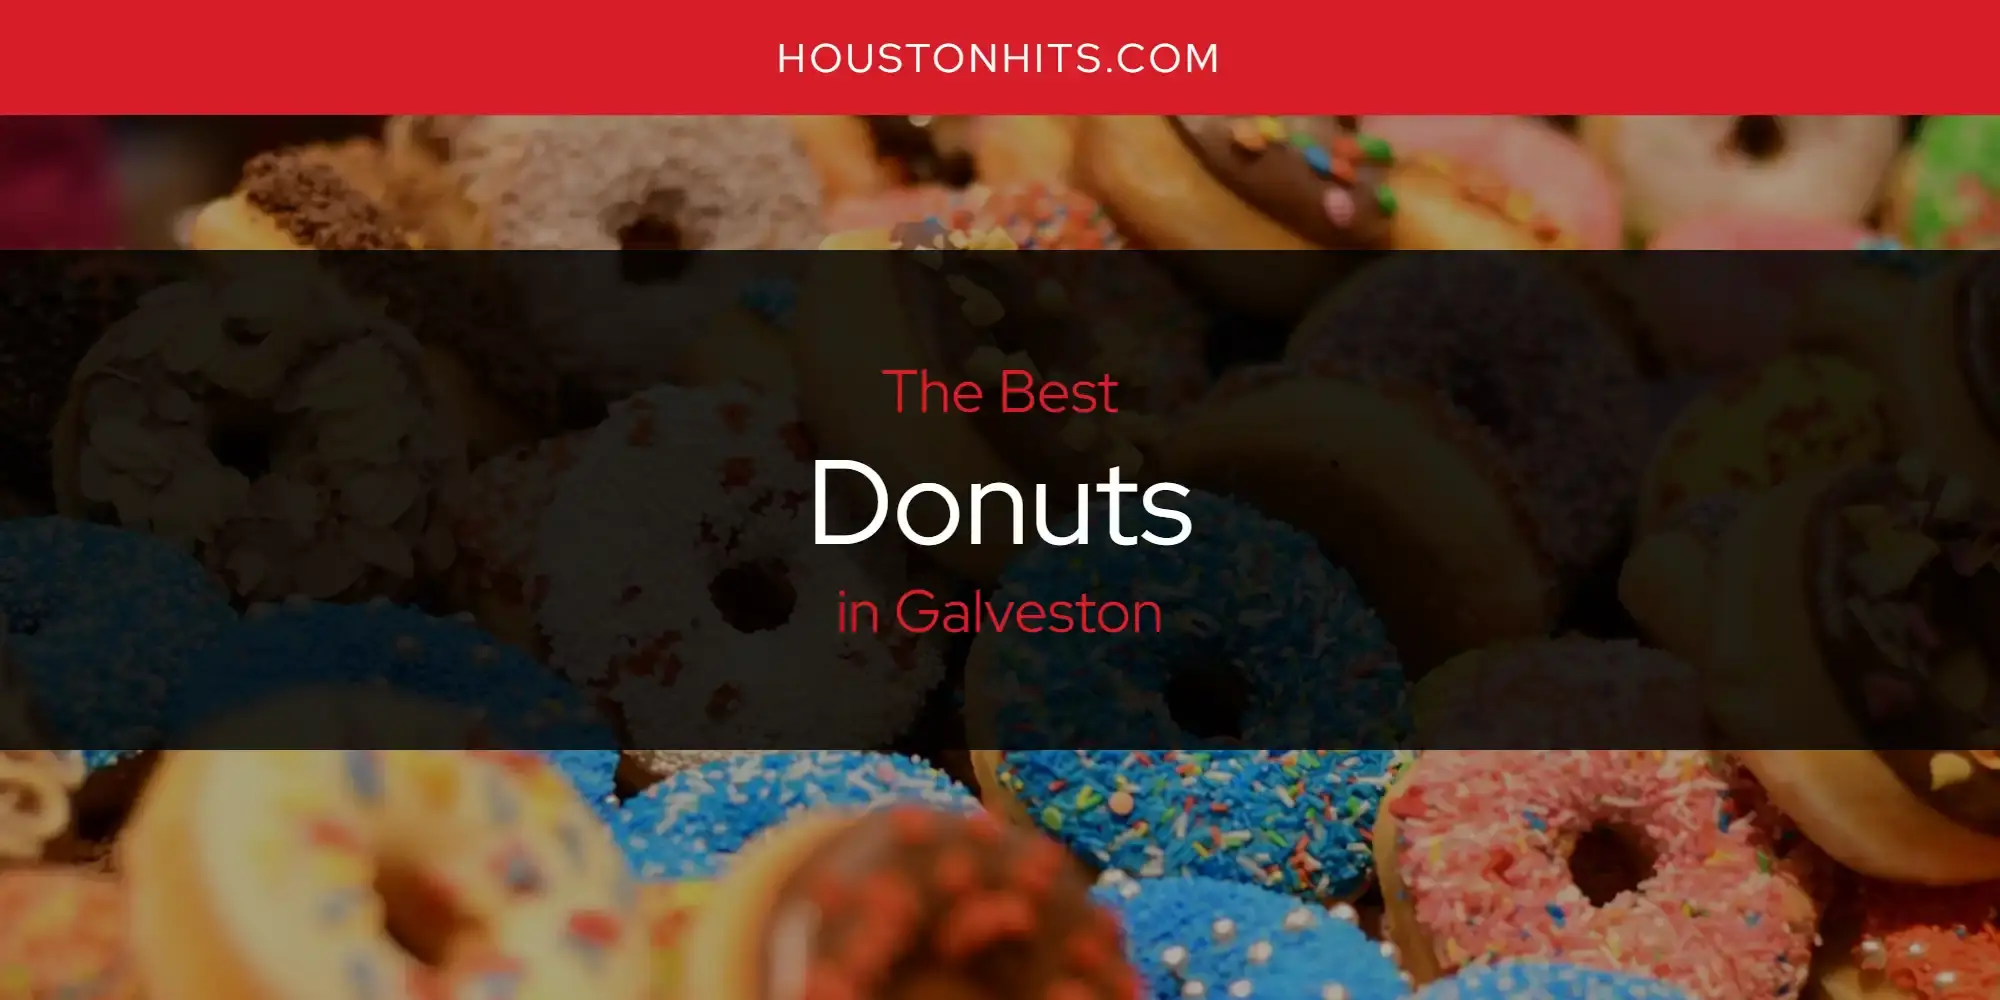 Best Donuts in Galveston? Here's the Top 17